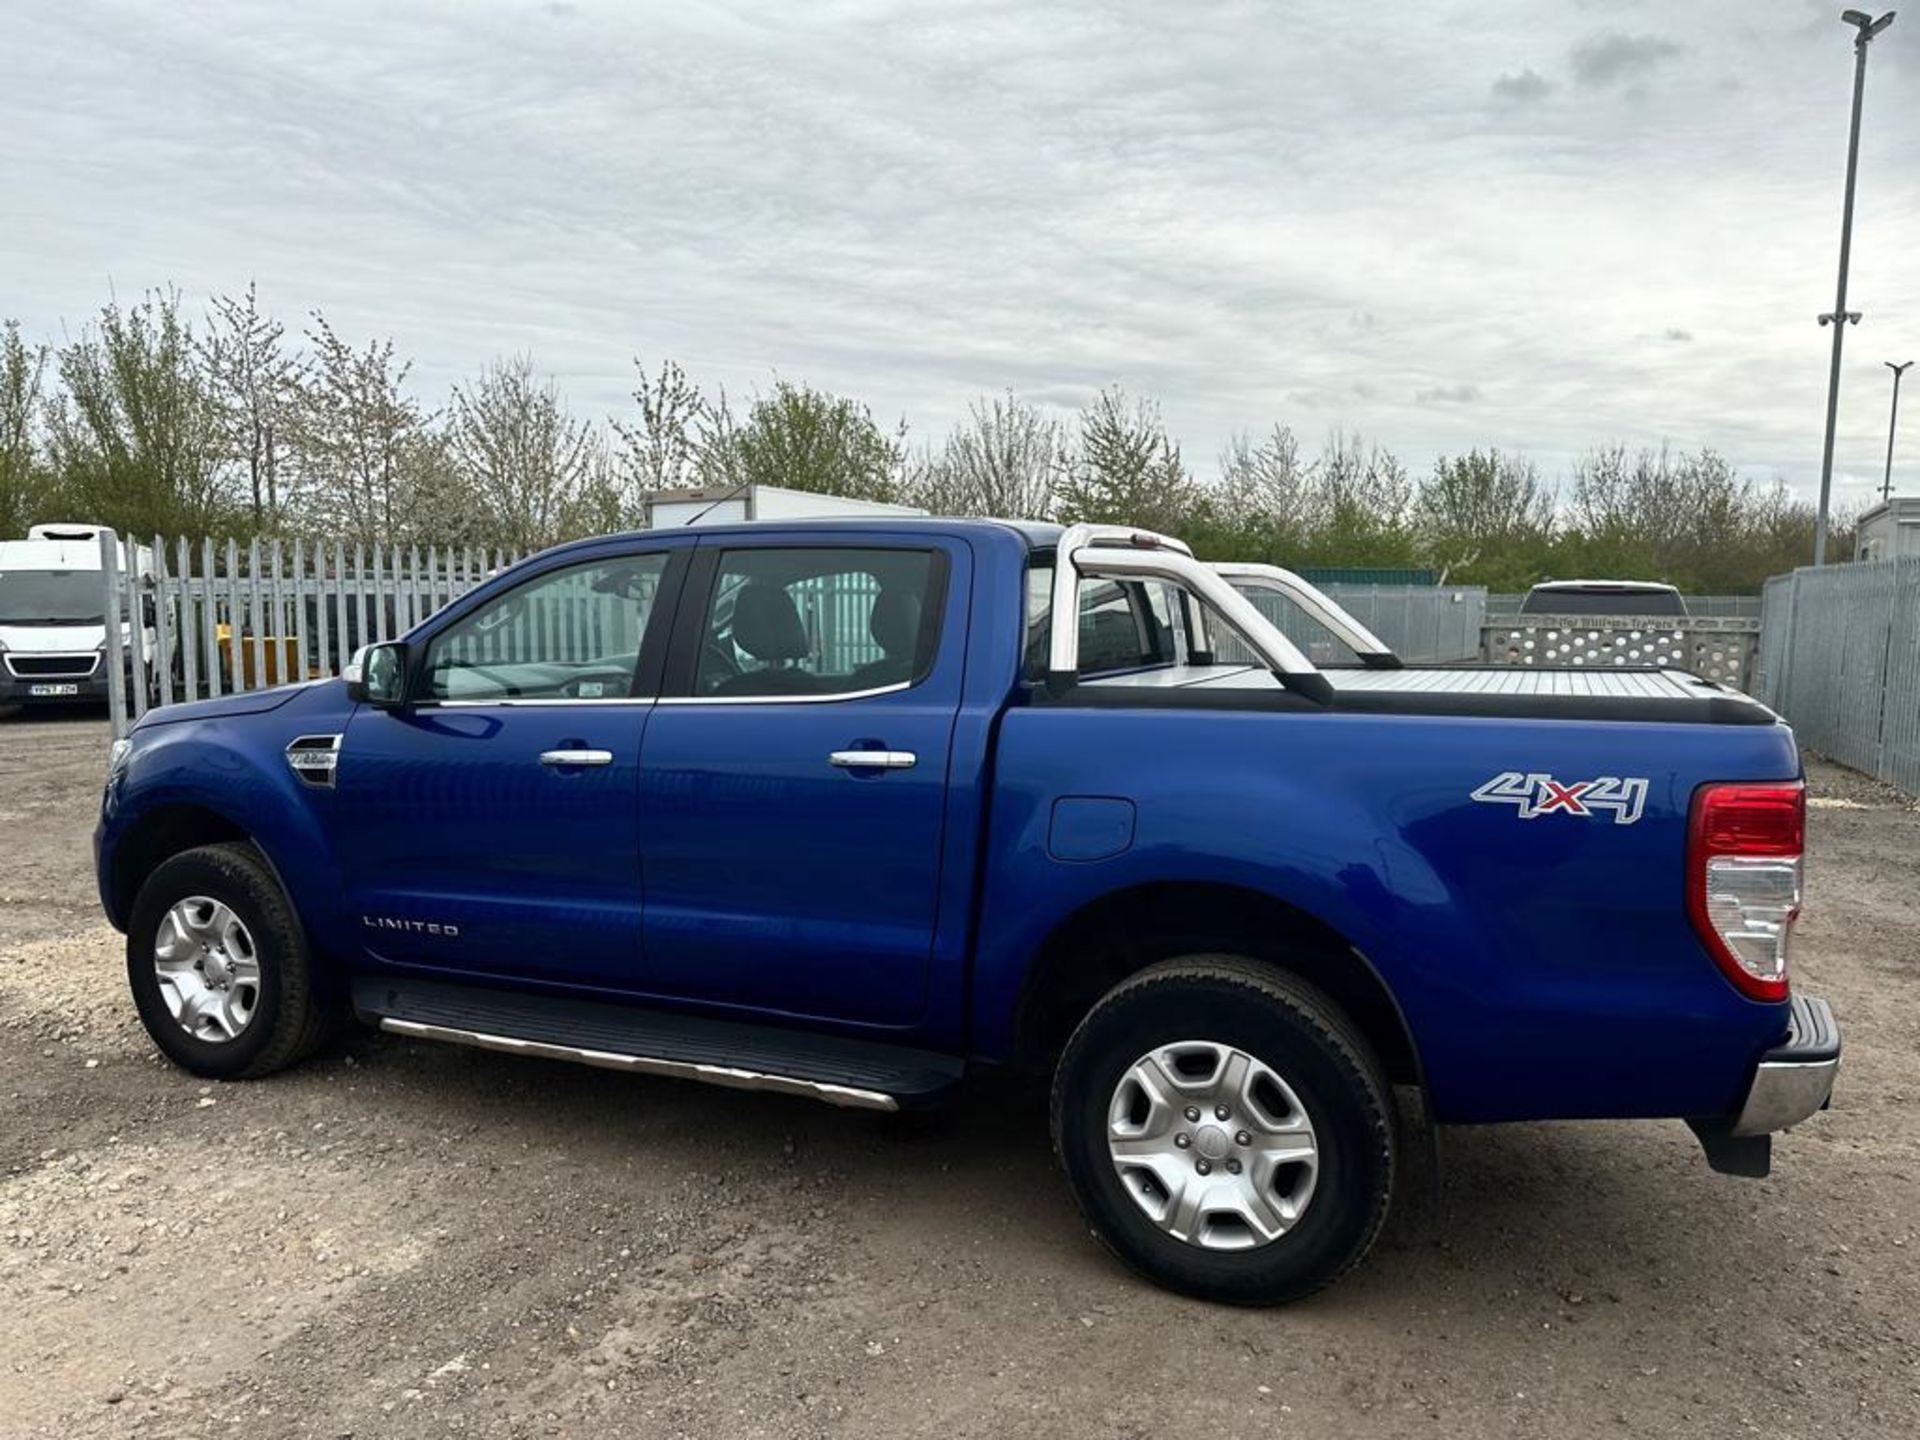 ** ON SALE ** Ford Ranger Limited DCI TDCI 160 4X4 2016 '16 Reg'-Automatic - A/C - -Bluetooth-No Vat - Image 7 of 38